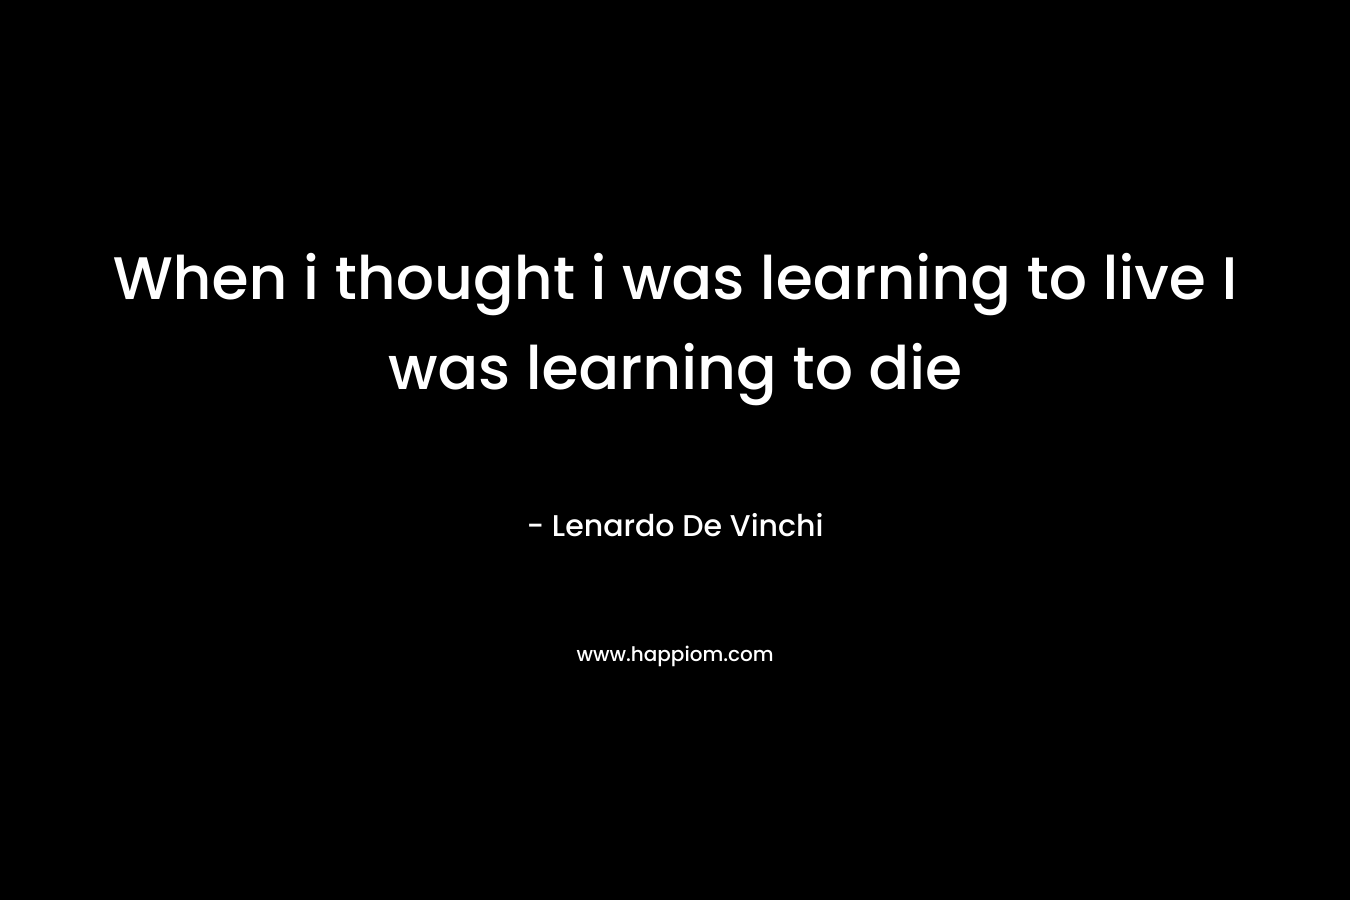 When i thought i was learning to live I was learning to die